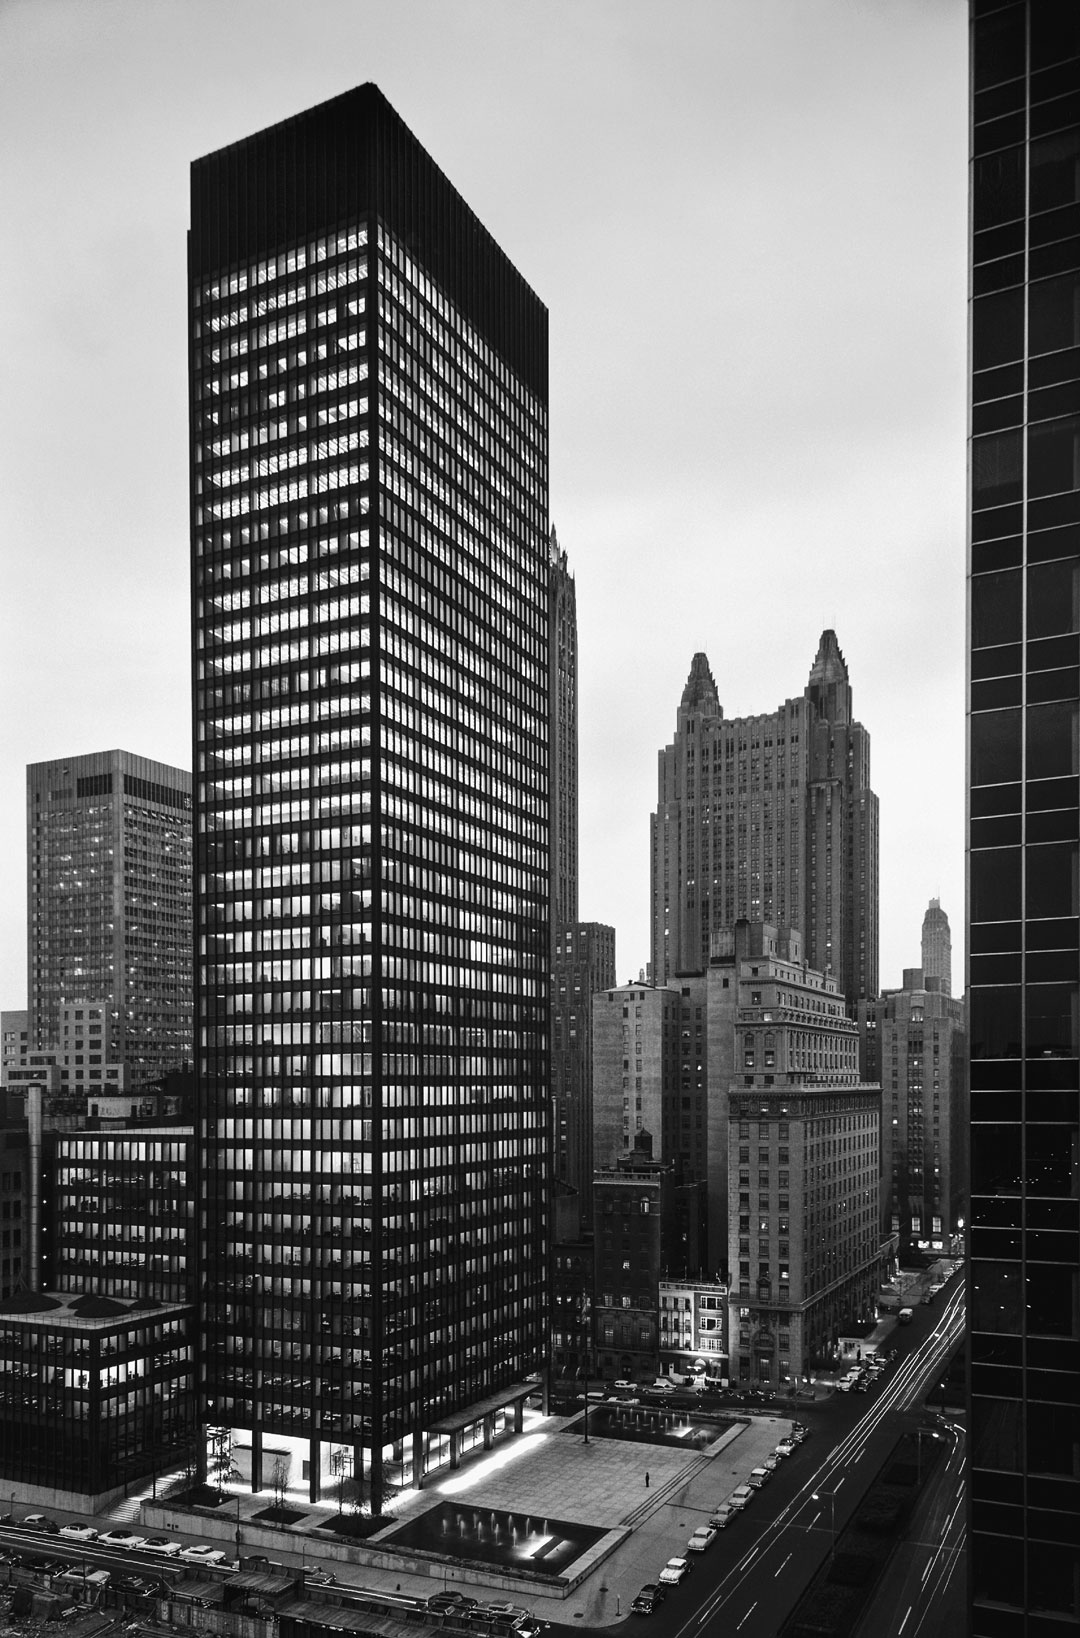 Ludwig Mies van der Rohe, The Seagram Building (1958) New York, 1958, by Ezra Stoller